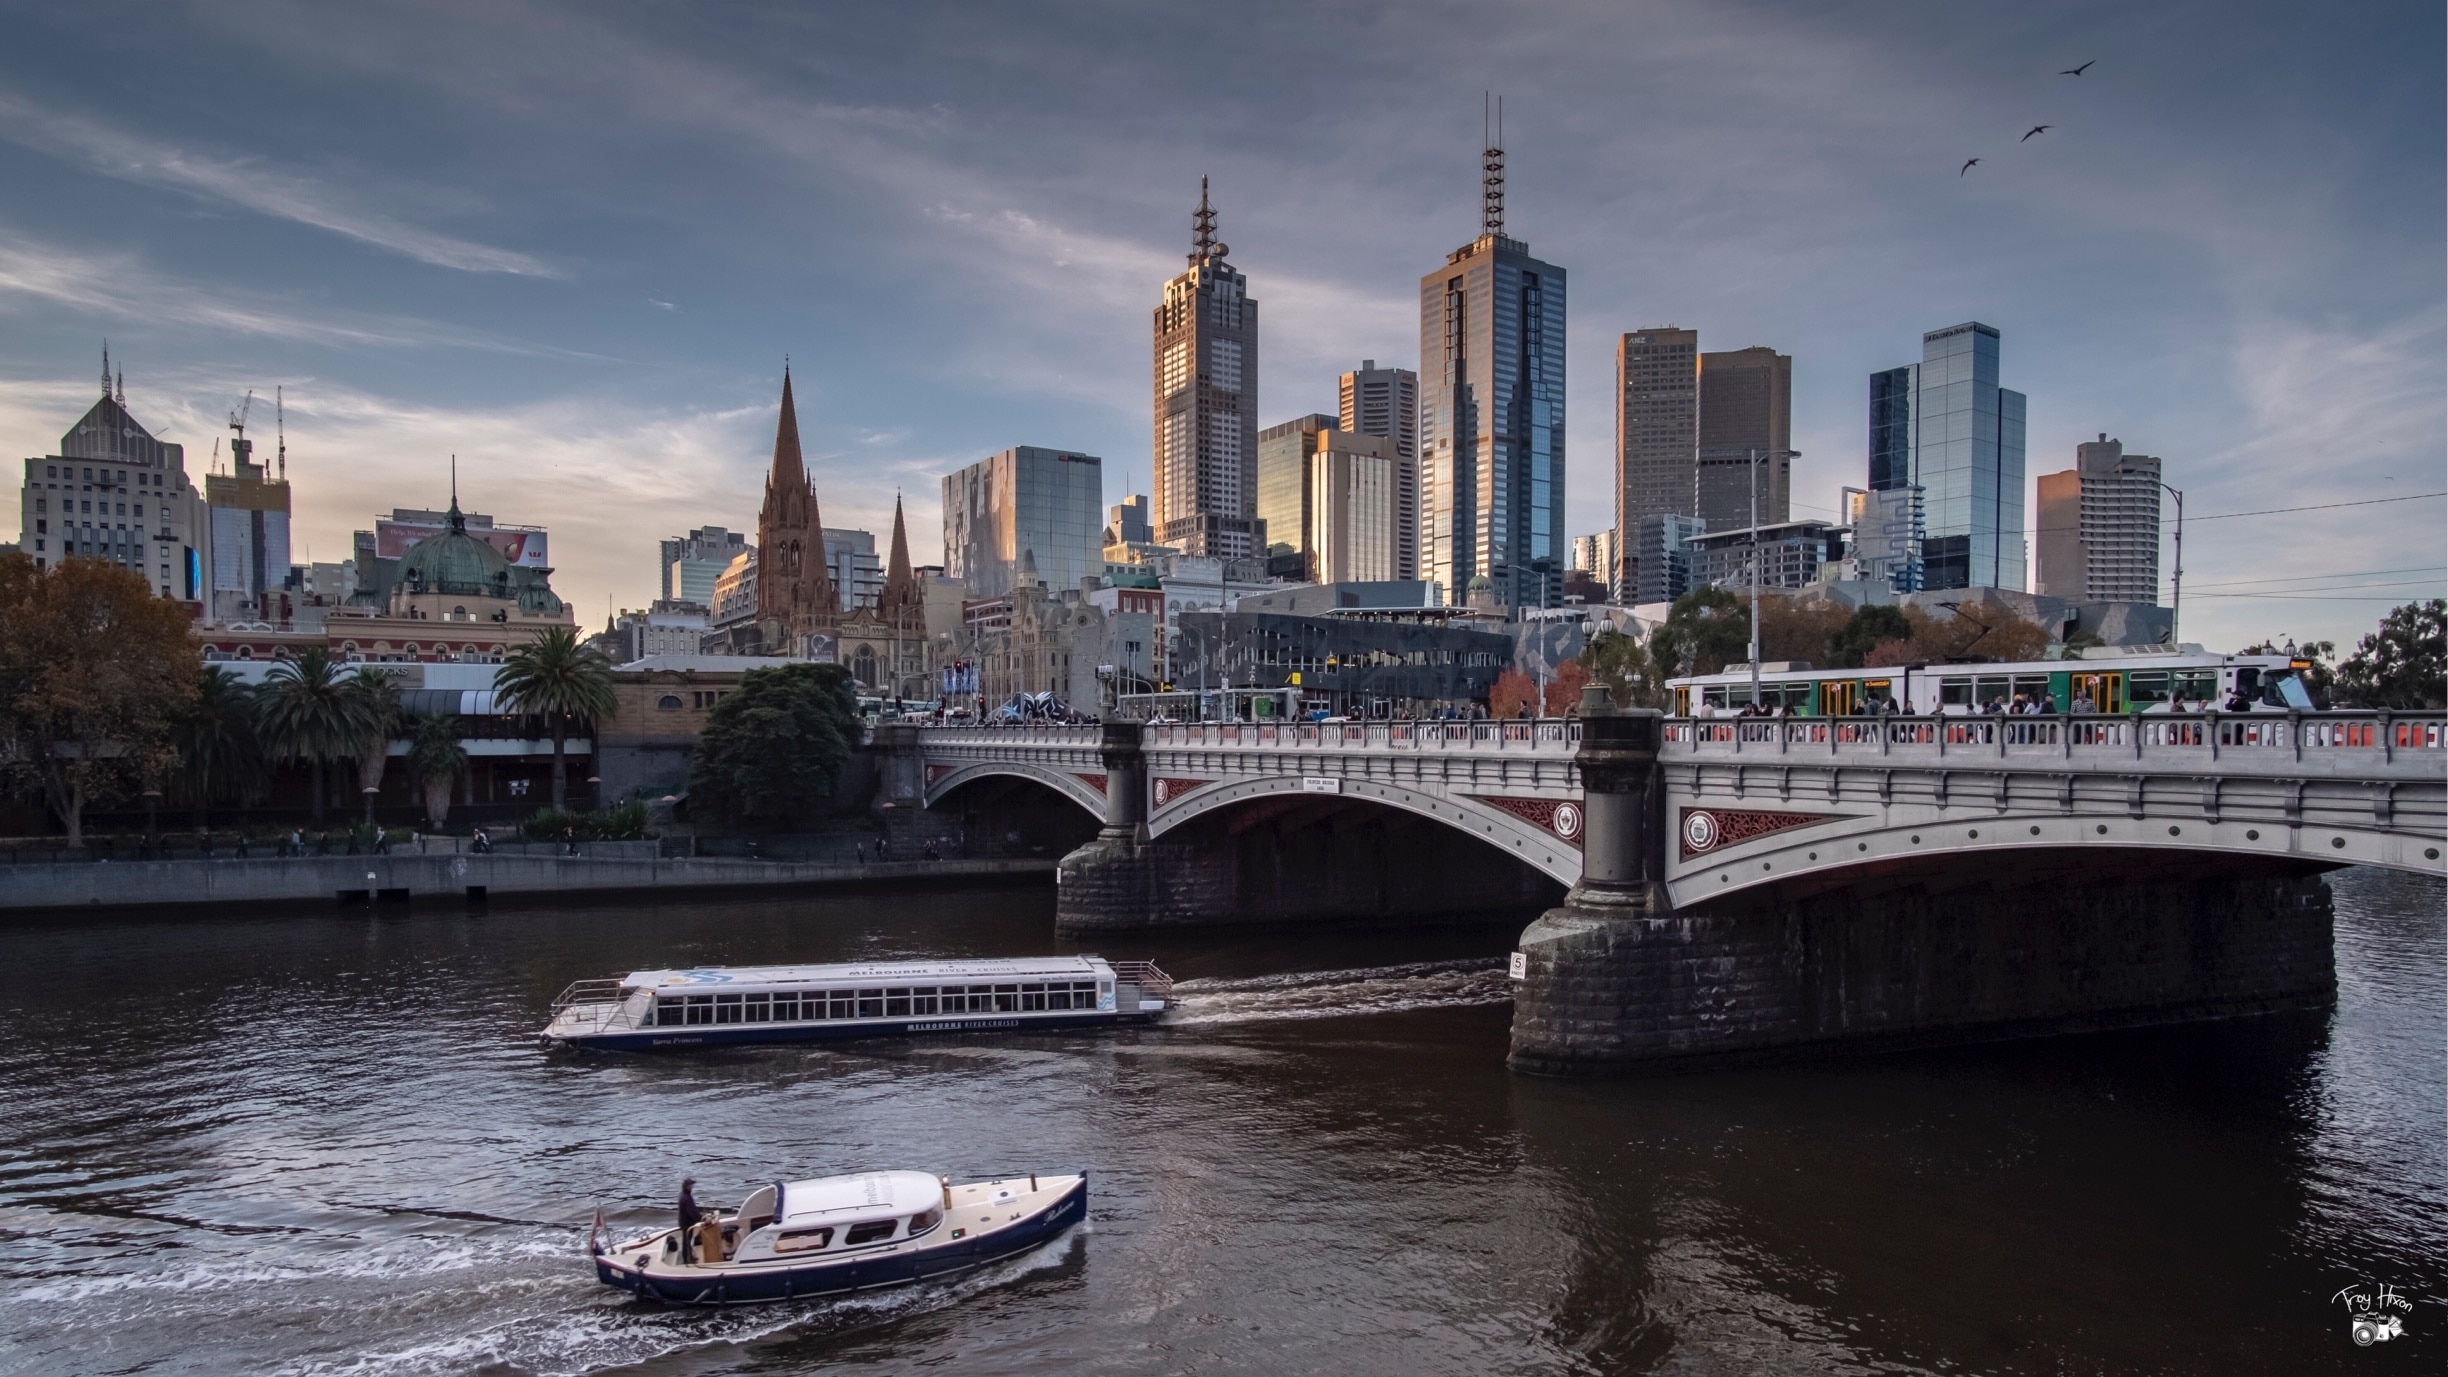 You can get a great view of the Flinders street station and the Melbourne city skyline from this vantage point.

I would love to come over to Greece and learn new skills as part of your workshop but as I live in Australia I will have to wait until you visit to catch up with you. #BvSCrete